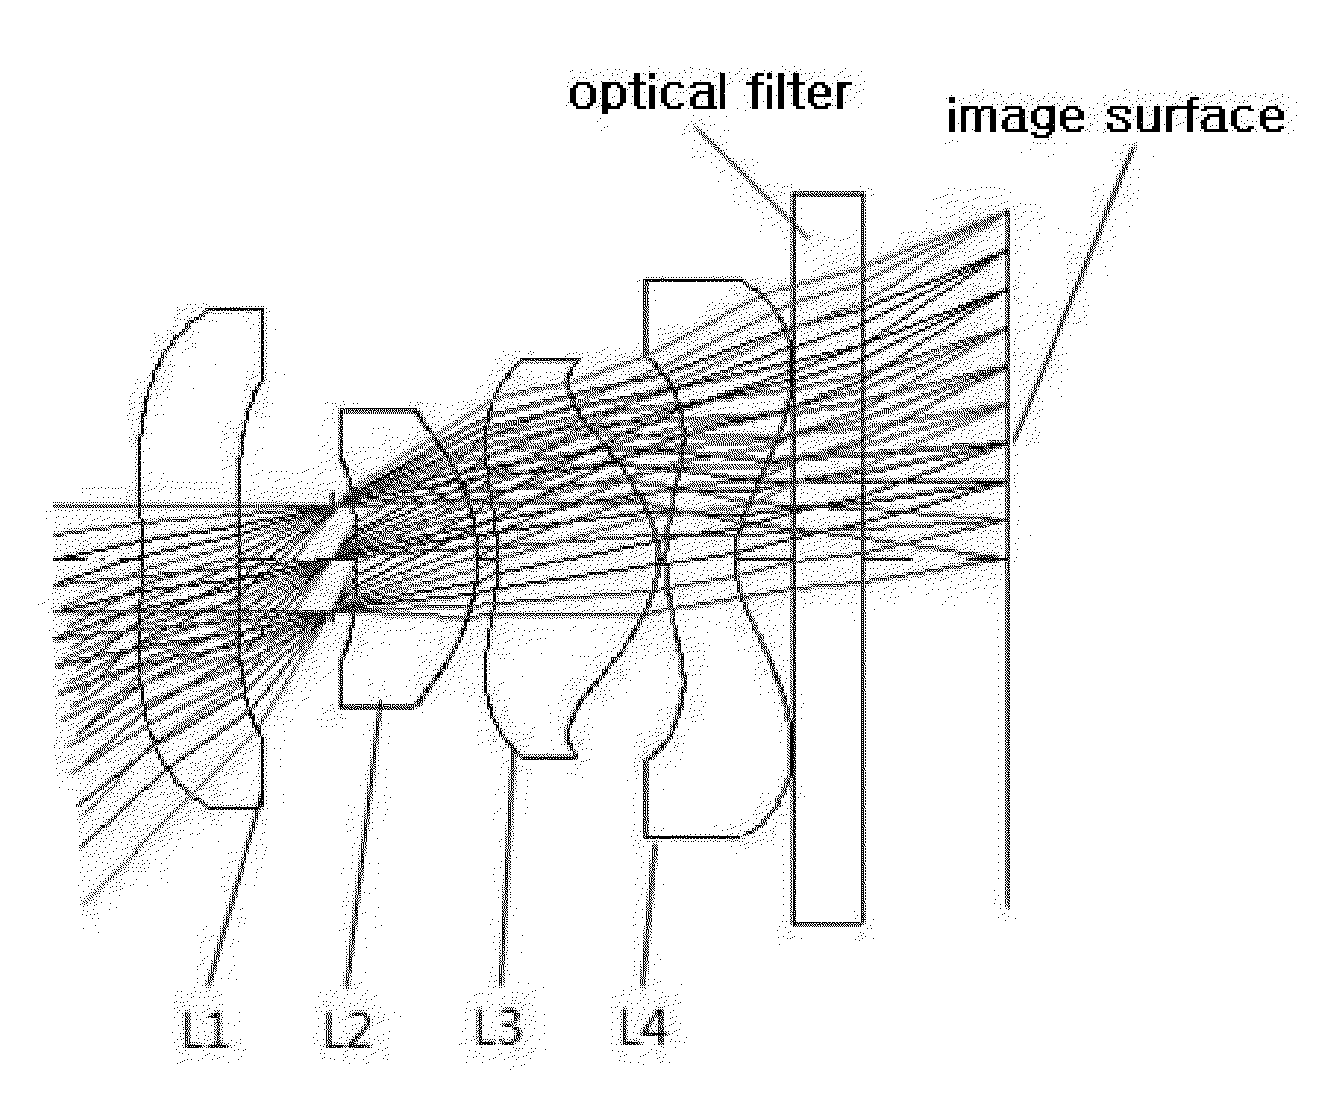 Wide-angle photographic lens system enabling correction of distortion